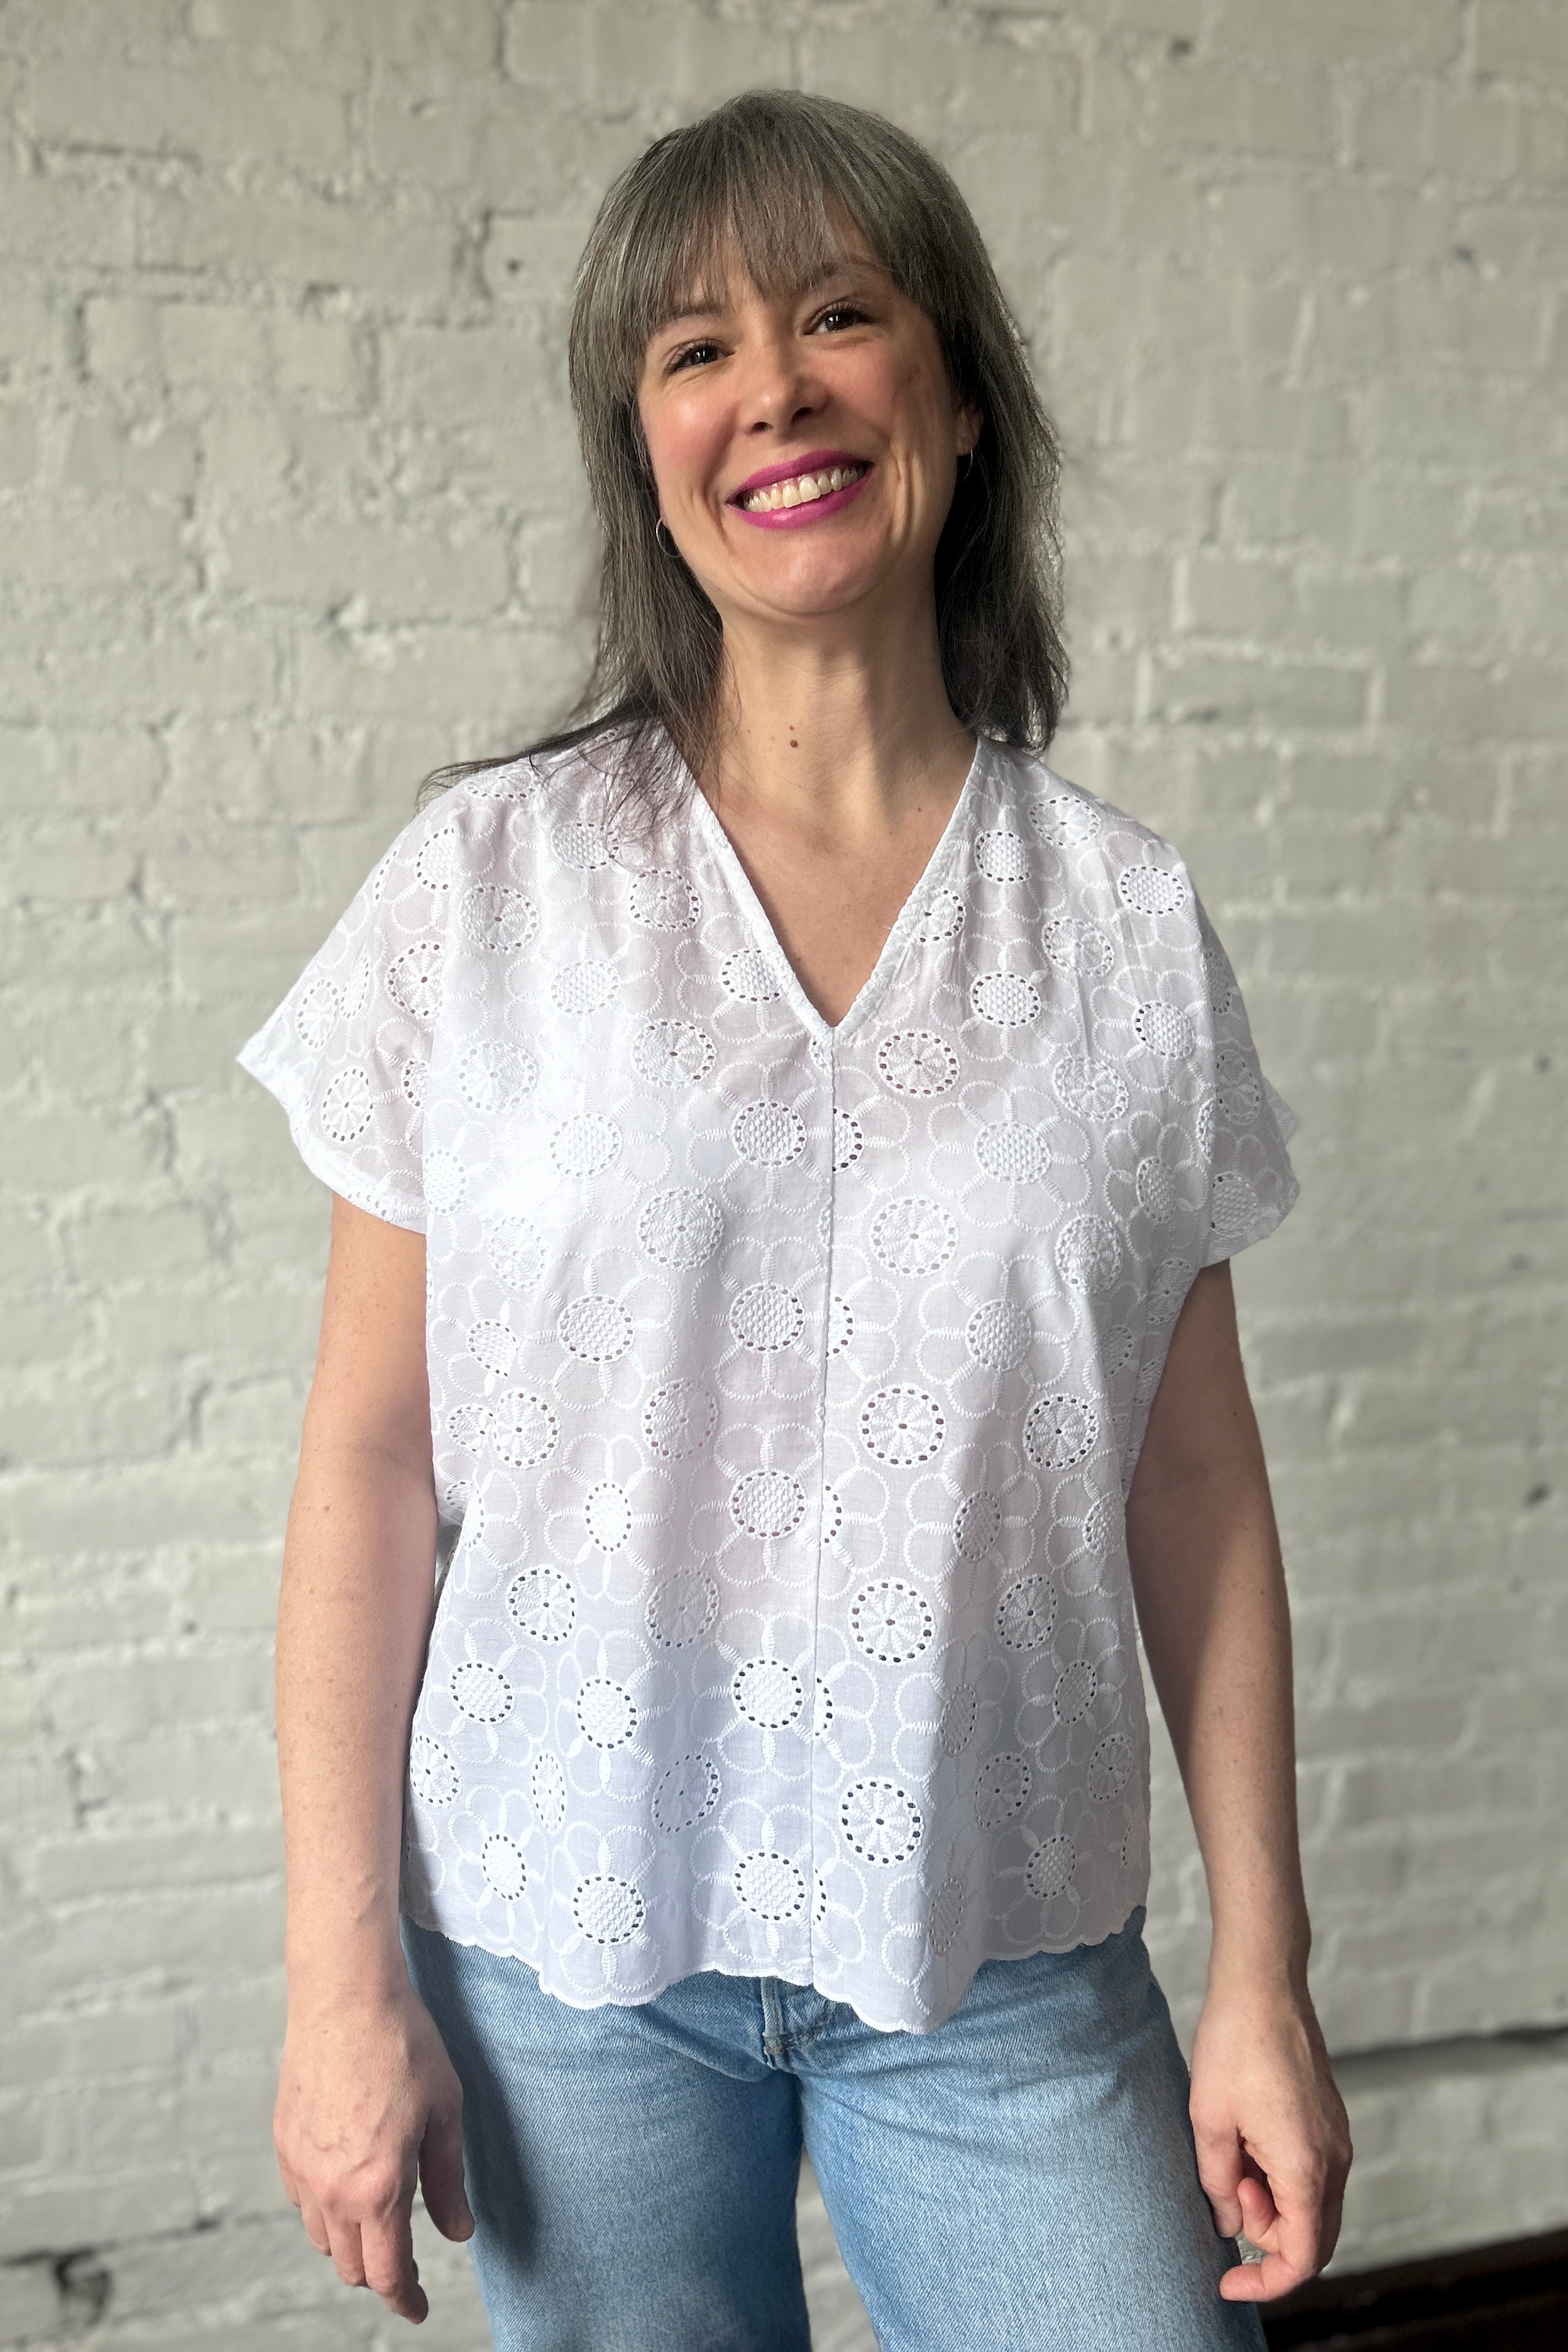 Smiling person models a boxy loose blouse in white cotton eyelet. Blouse has v-neck, short sleeves, and a scalloped hem. The eyelets are a large daisy pattern.